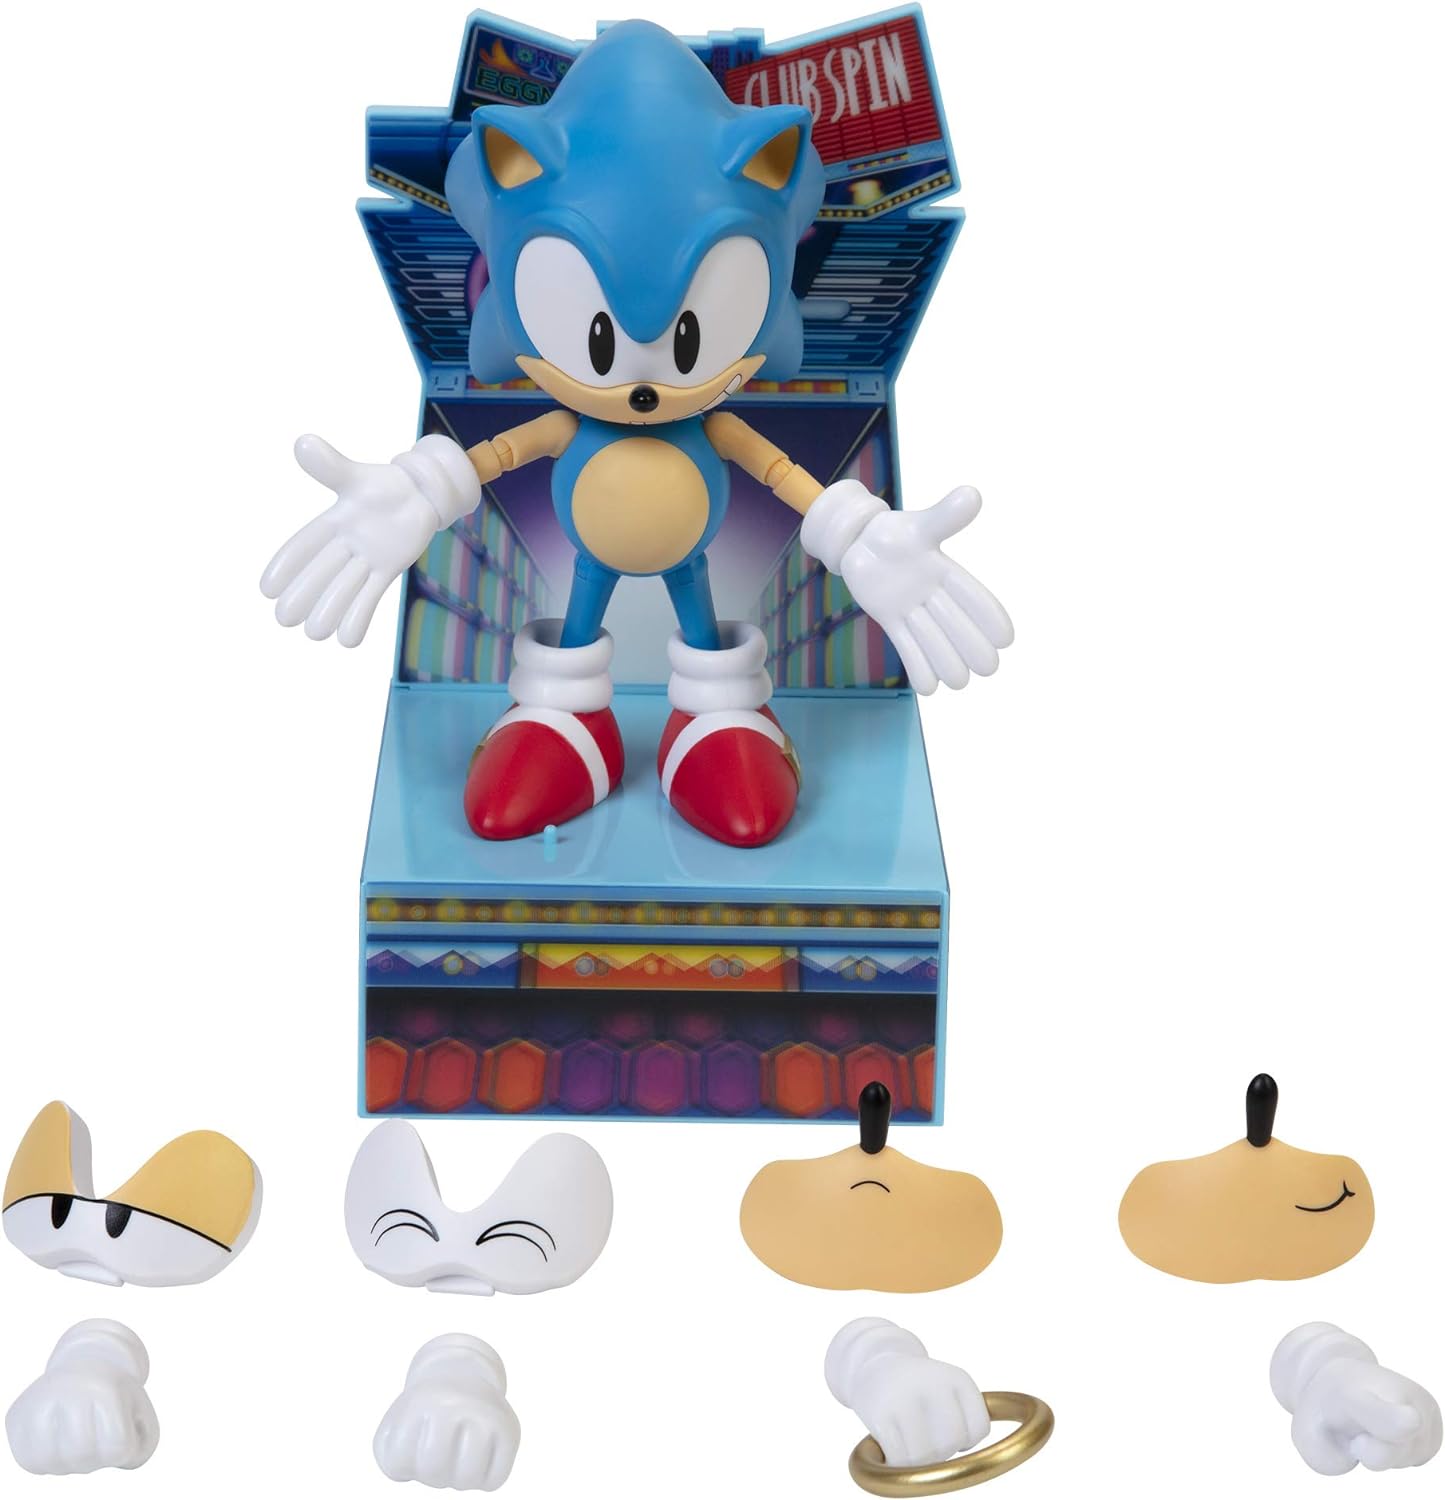 6" Sonic The Hedgehog Ultimate Sonic Collectible Action Figure w/ 12 Swappable Parts & Base $17.11  + Free S&H w/ Walmart+ or $35+